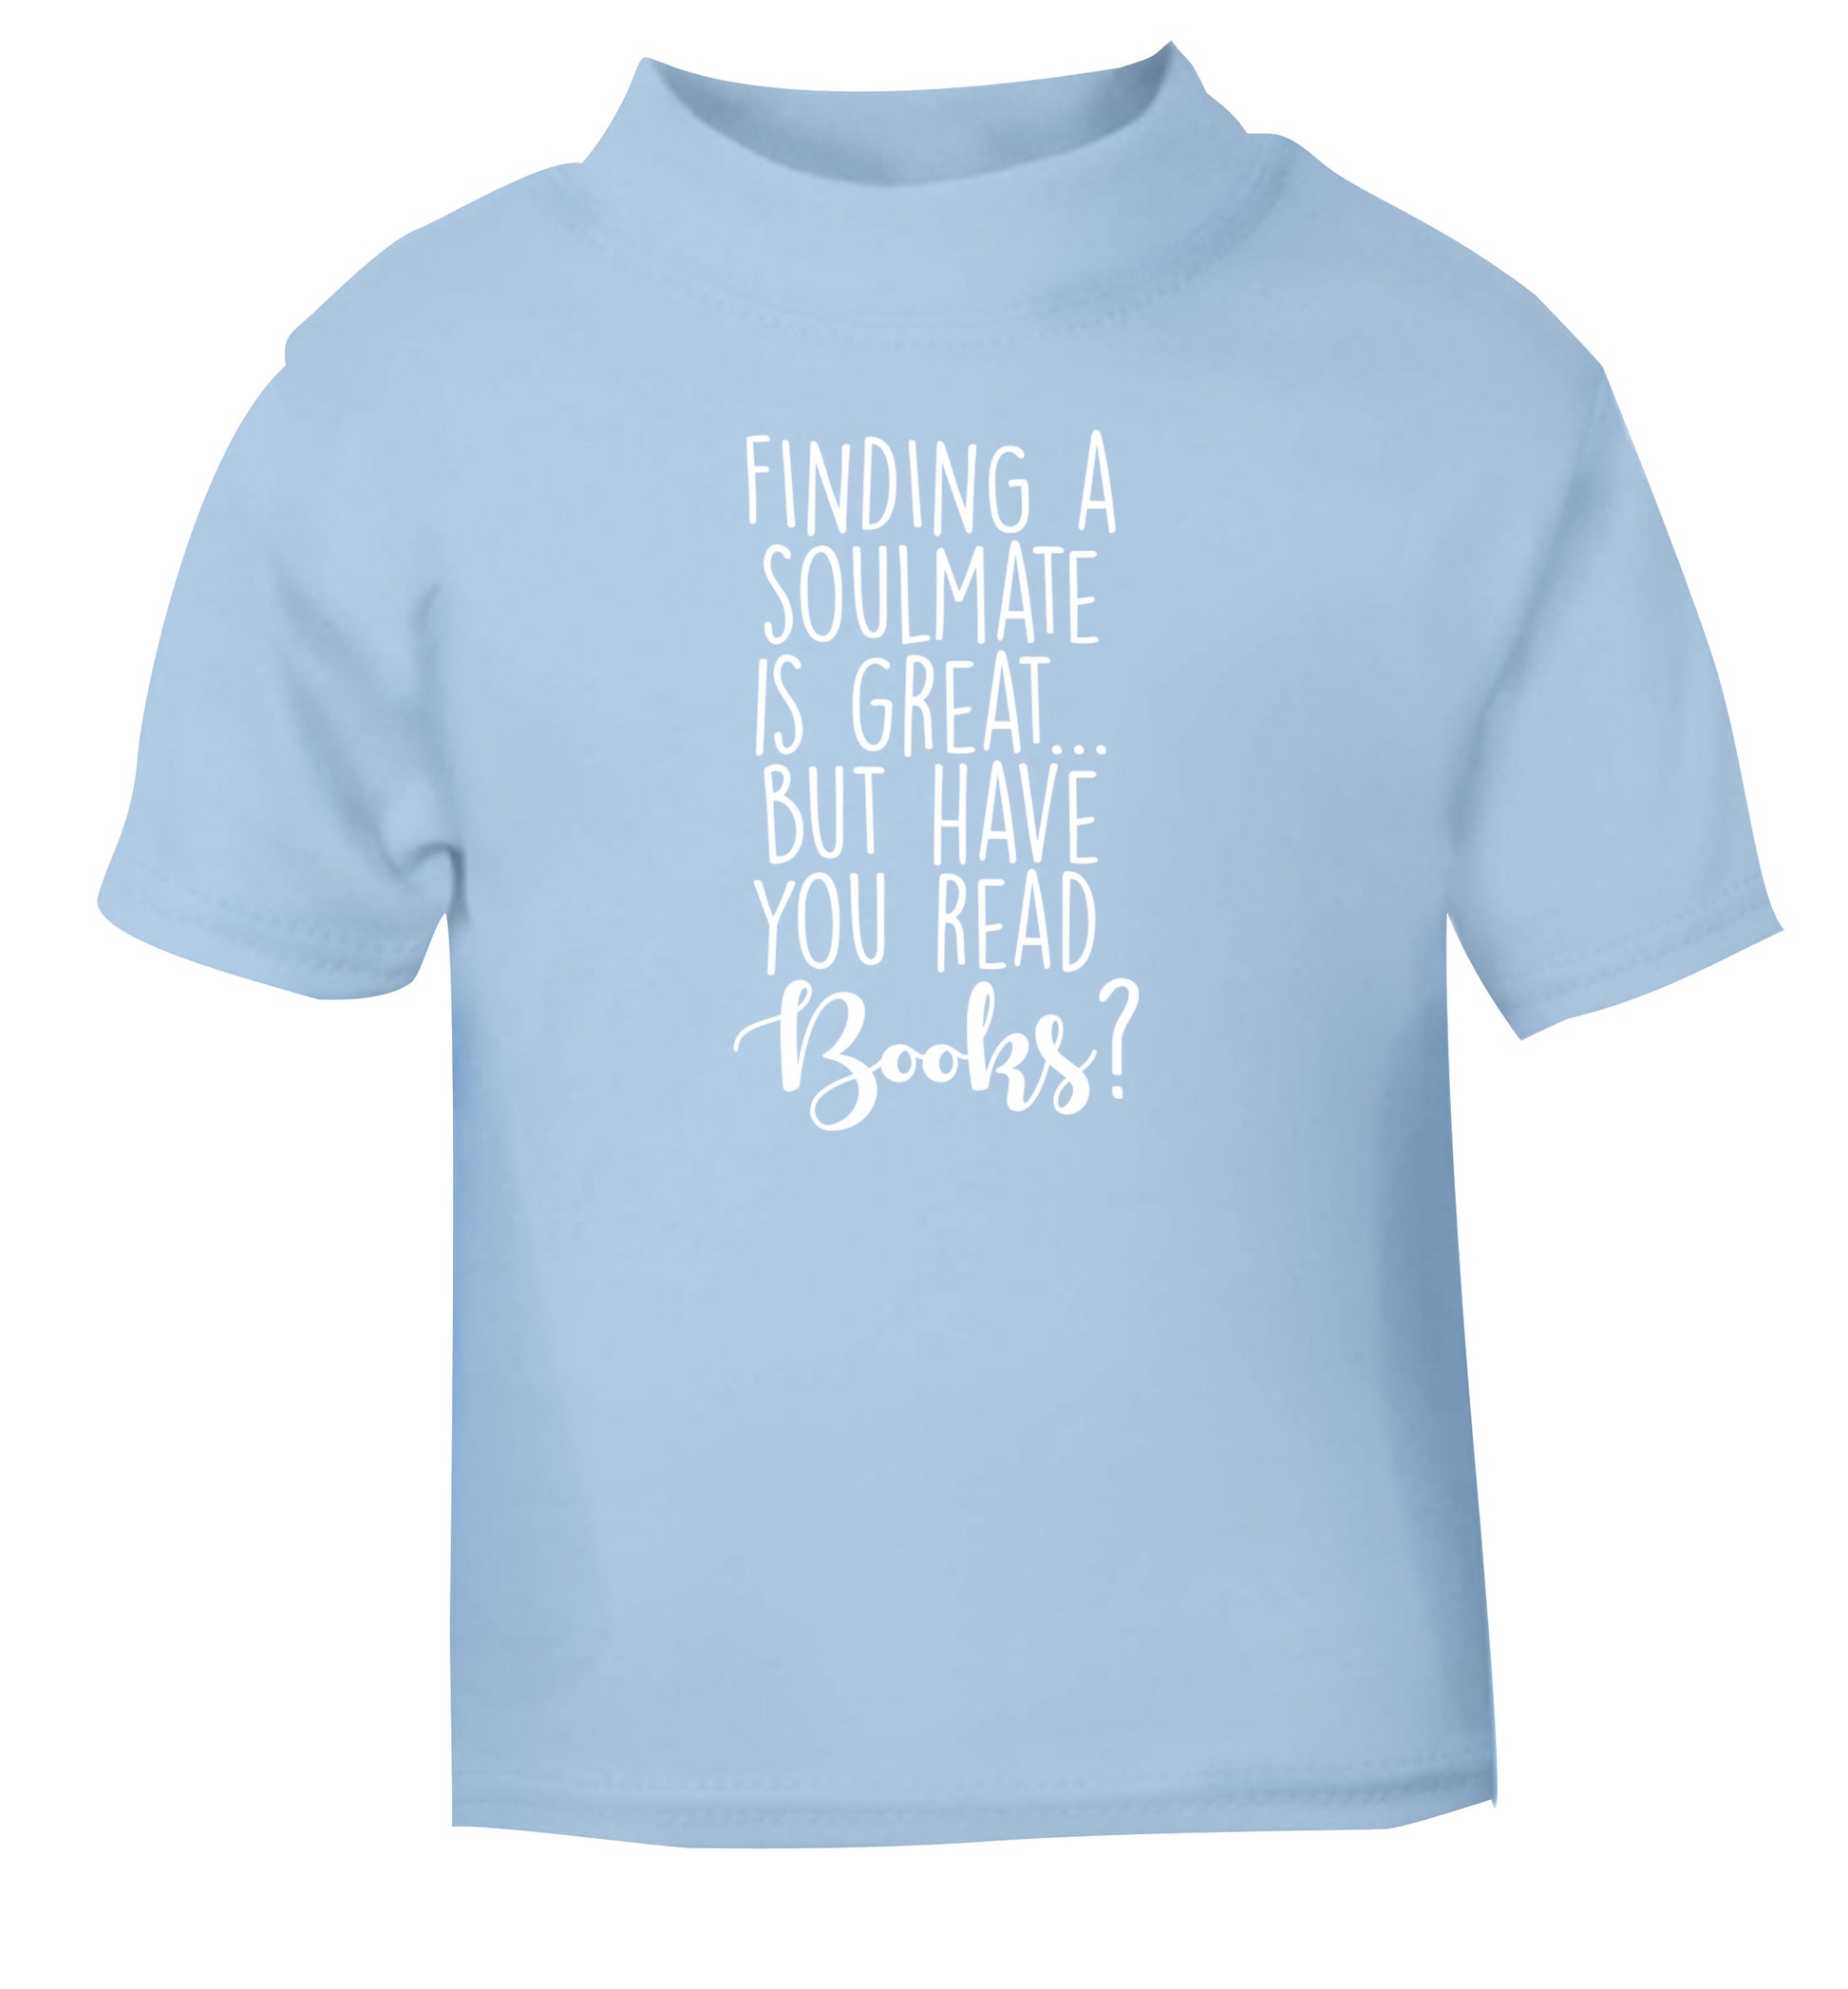 Finding a soulmate is great but have you read books? light blue Baby Toddler Tshirt 2 Years